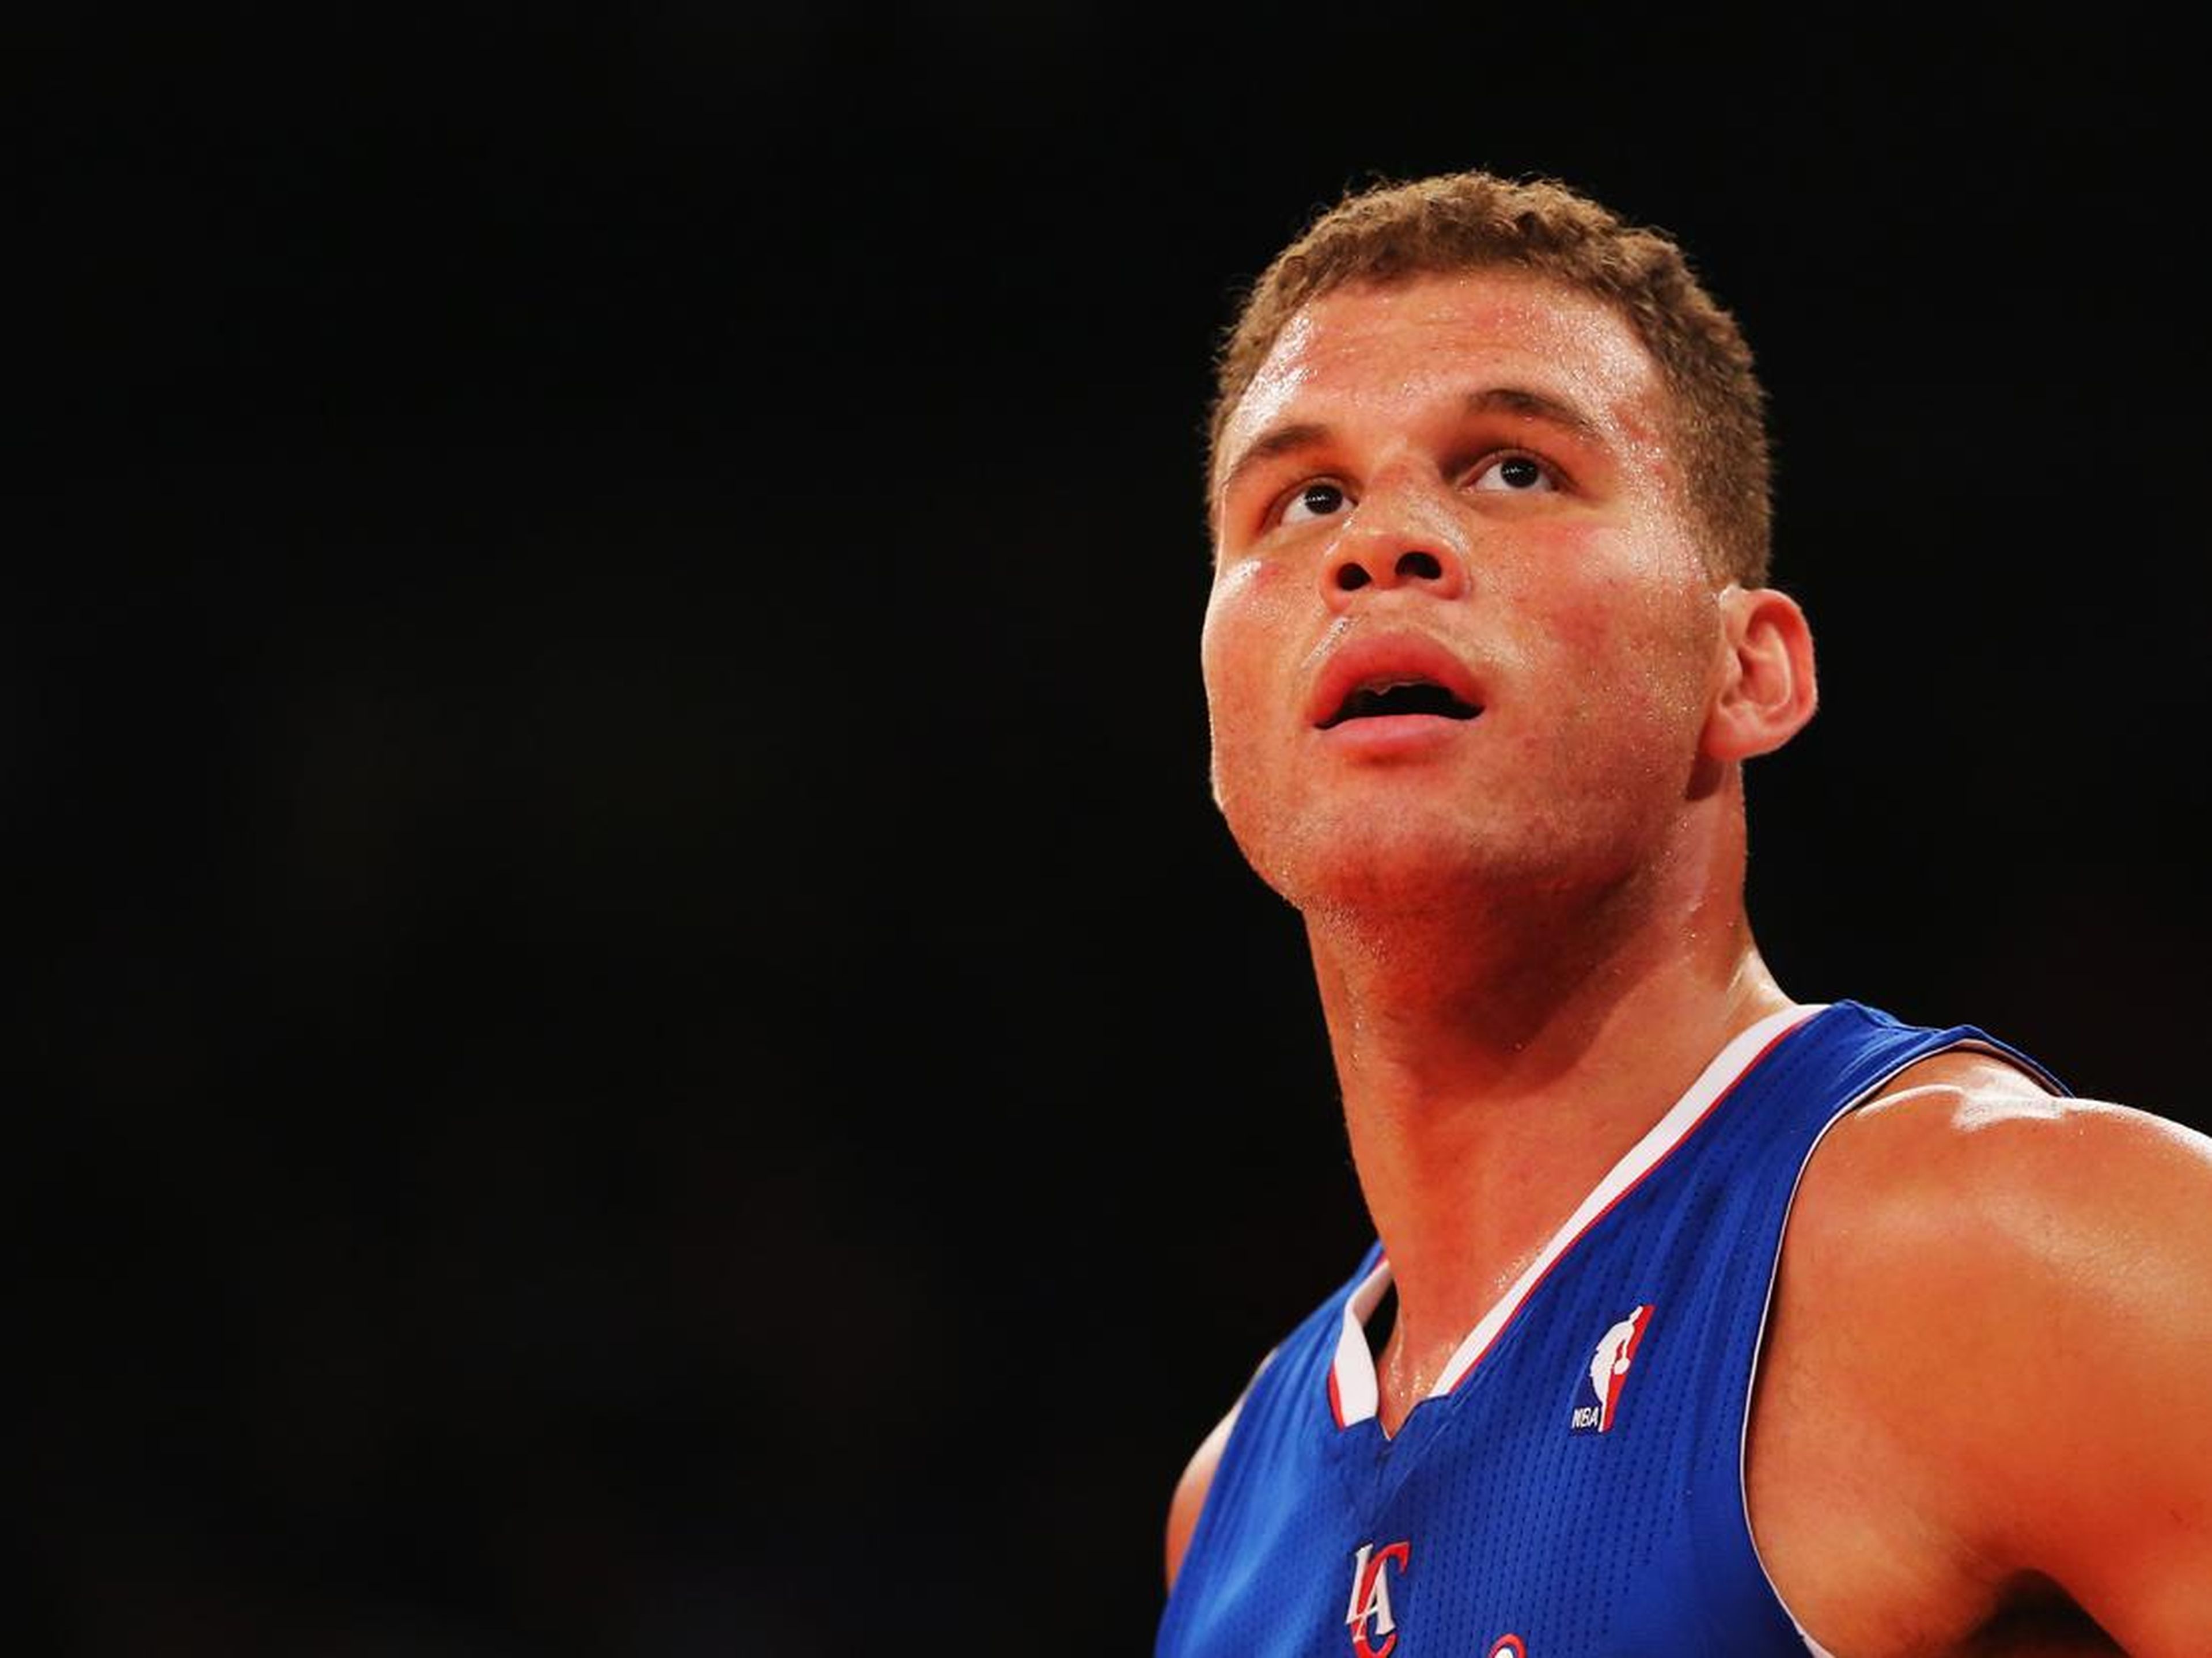 Blake Griffin was pulled out of a Oklahoma public school after his mother, who was herself a teacher, disagreed with the direction the public school system was heading.